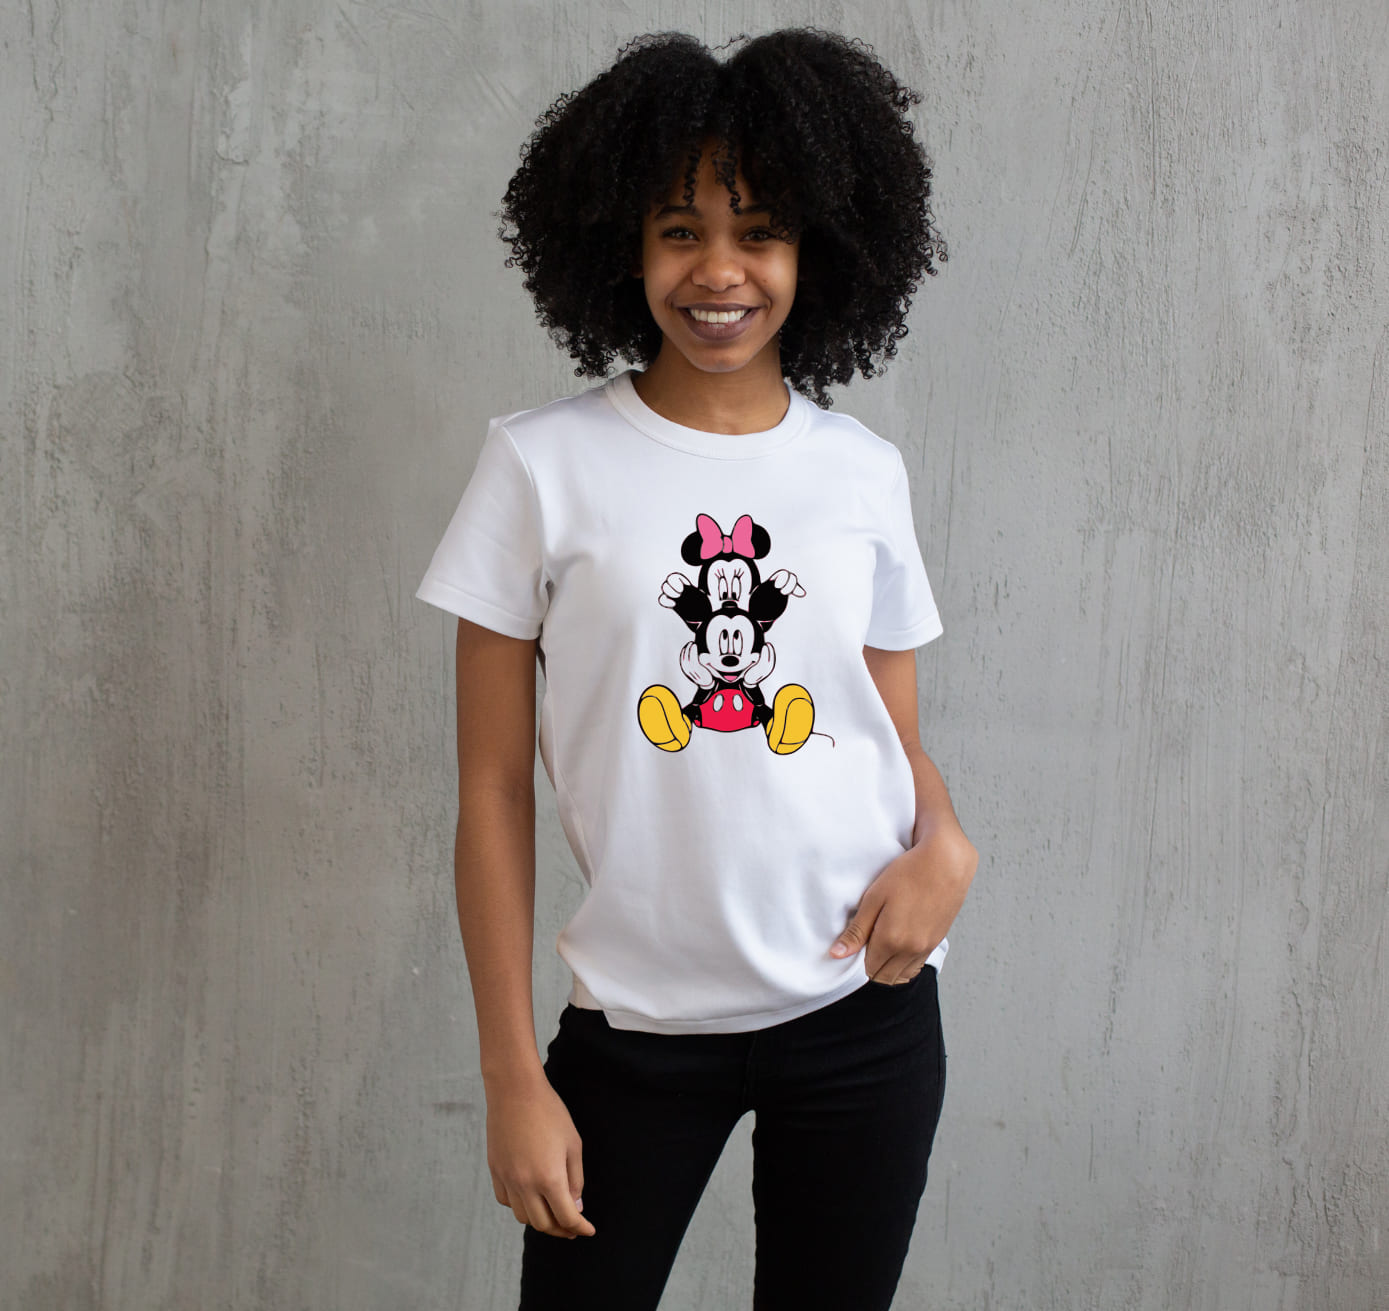 Funny. and colorful mickey mouse on the white t-shirt.